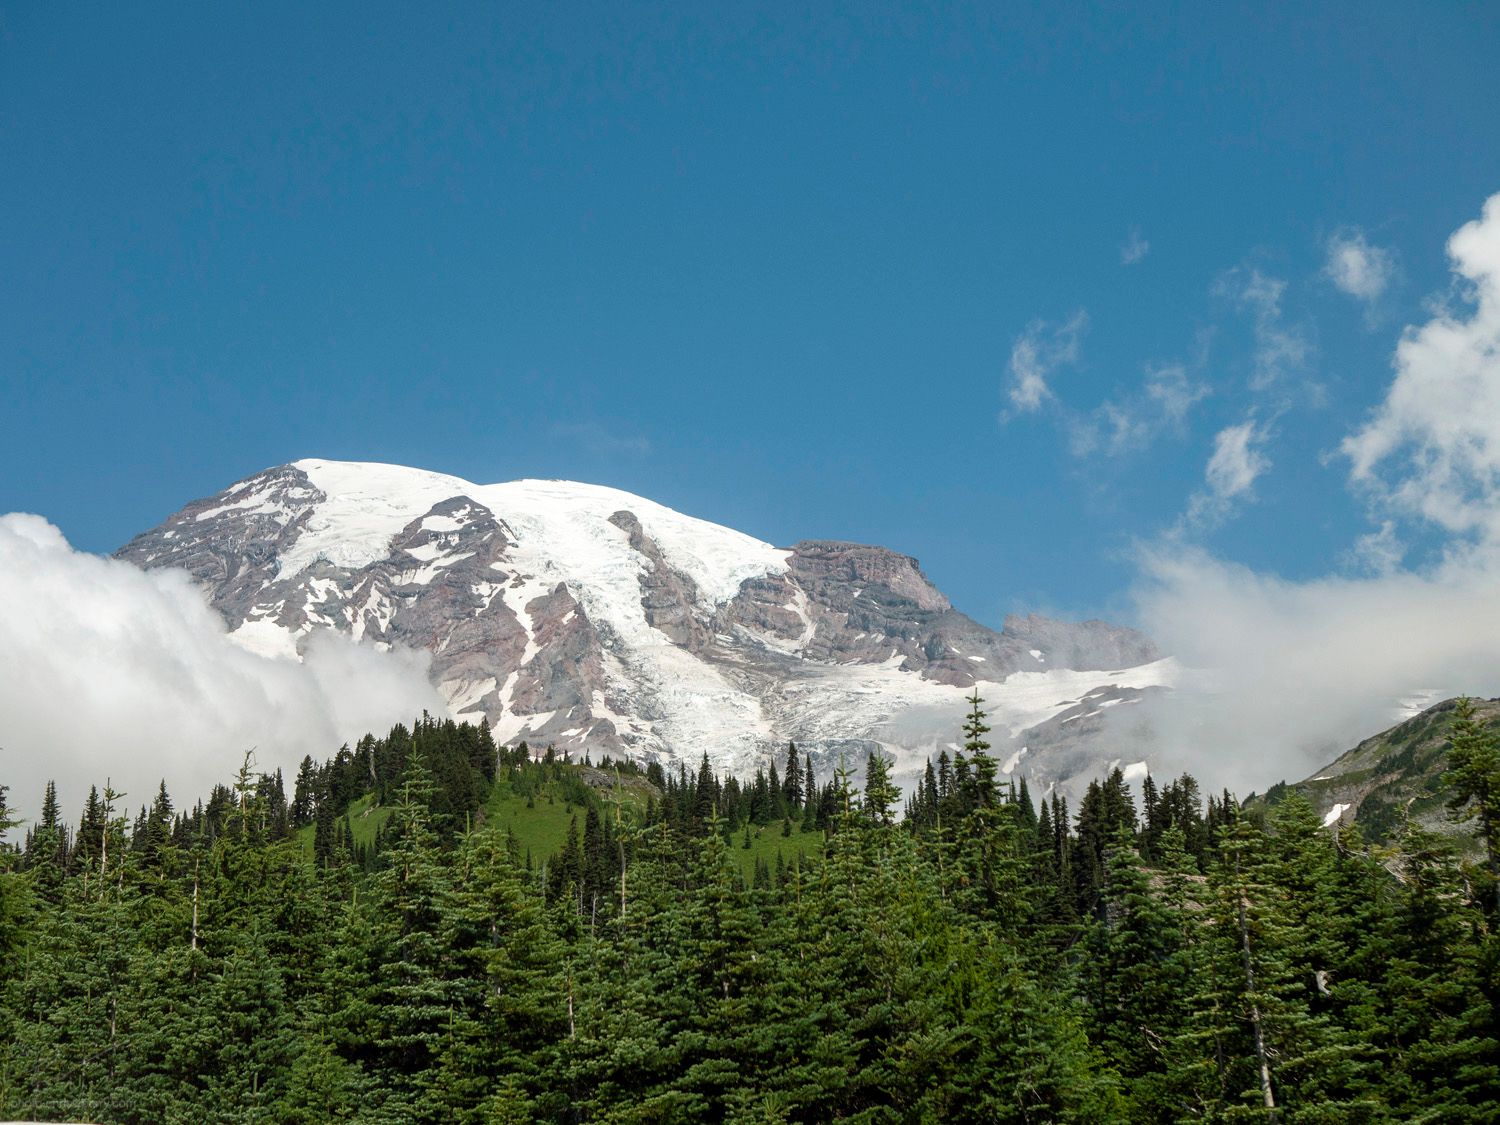 Landscape photo of the peak of Mt. Rainier, framed by clouds to the left and right, and trees in the foreground.